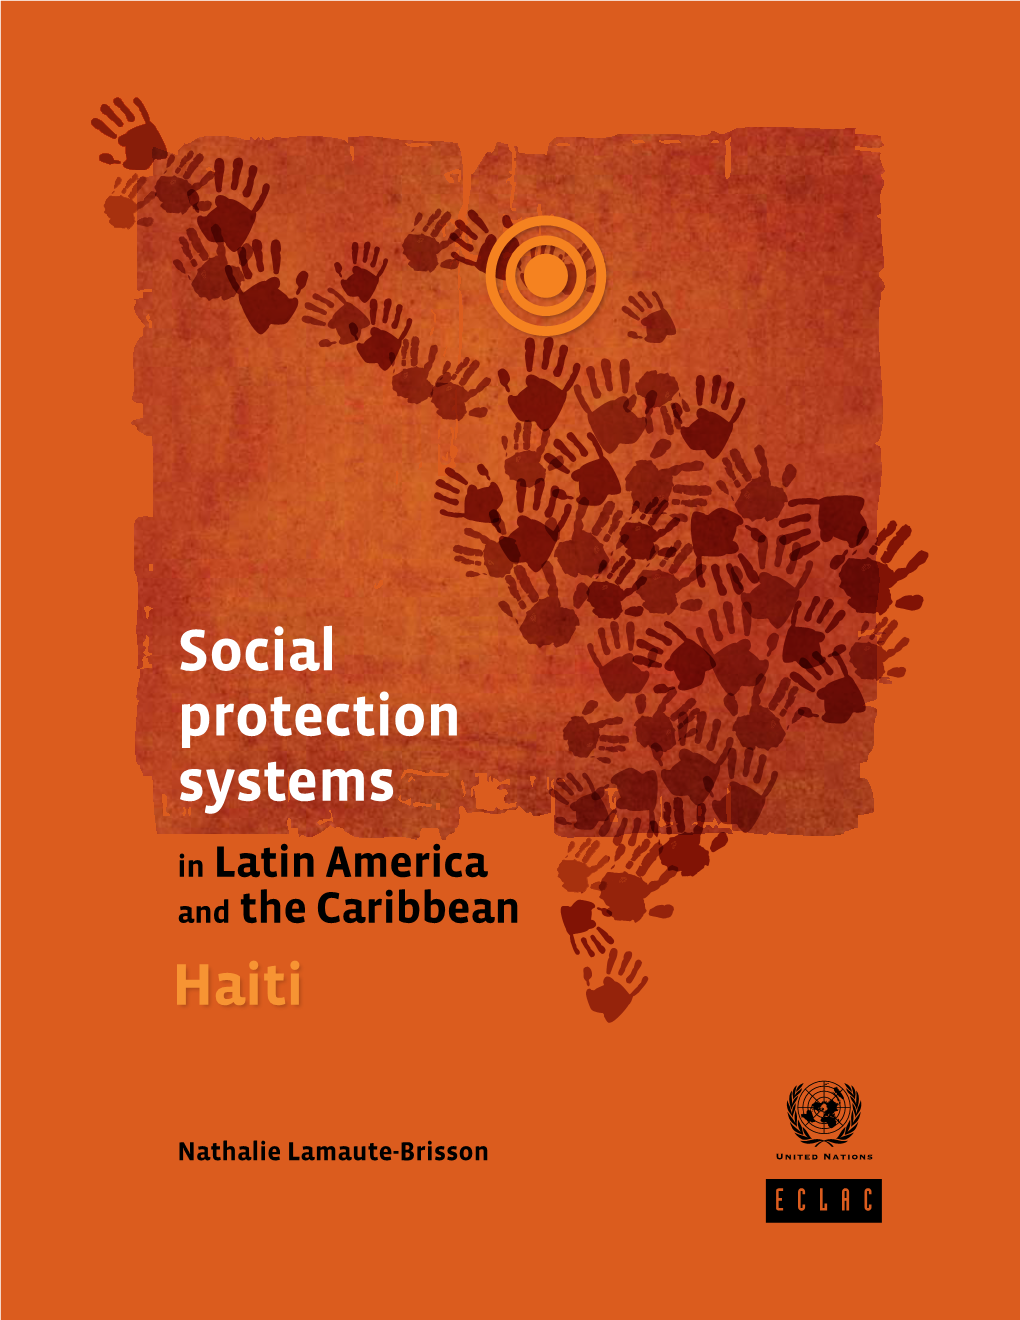 Social Protection Systems in Latin America and the Caribbean: Haiti